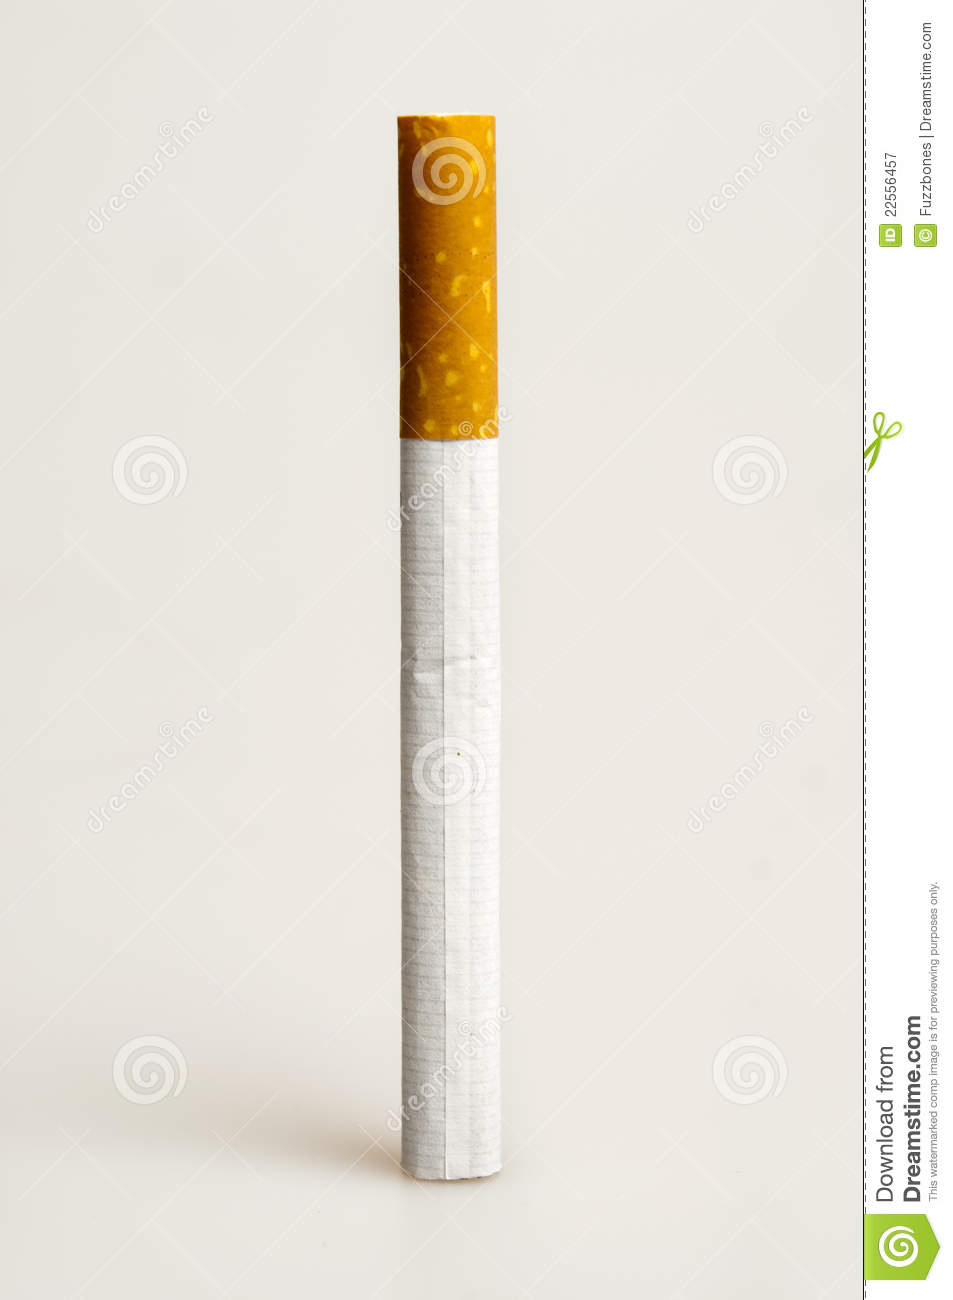 Cigarette Royalty Free Stock Photography   Image  22556457